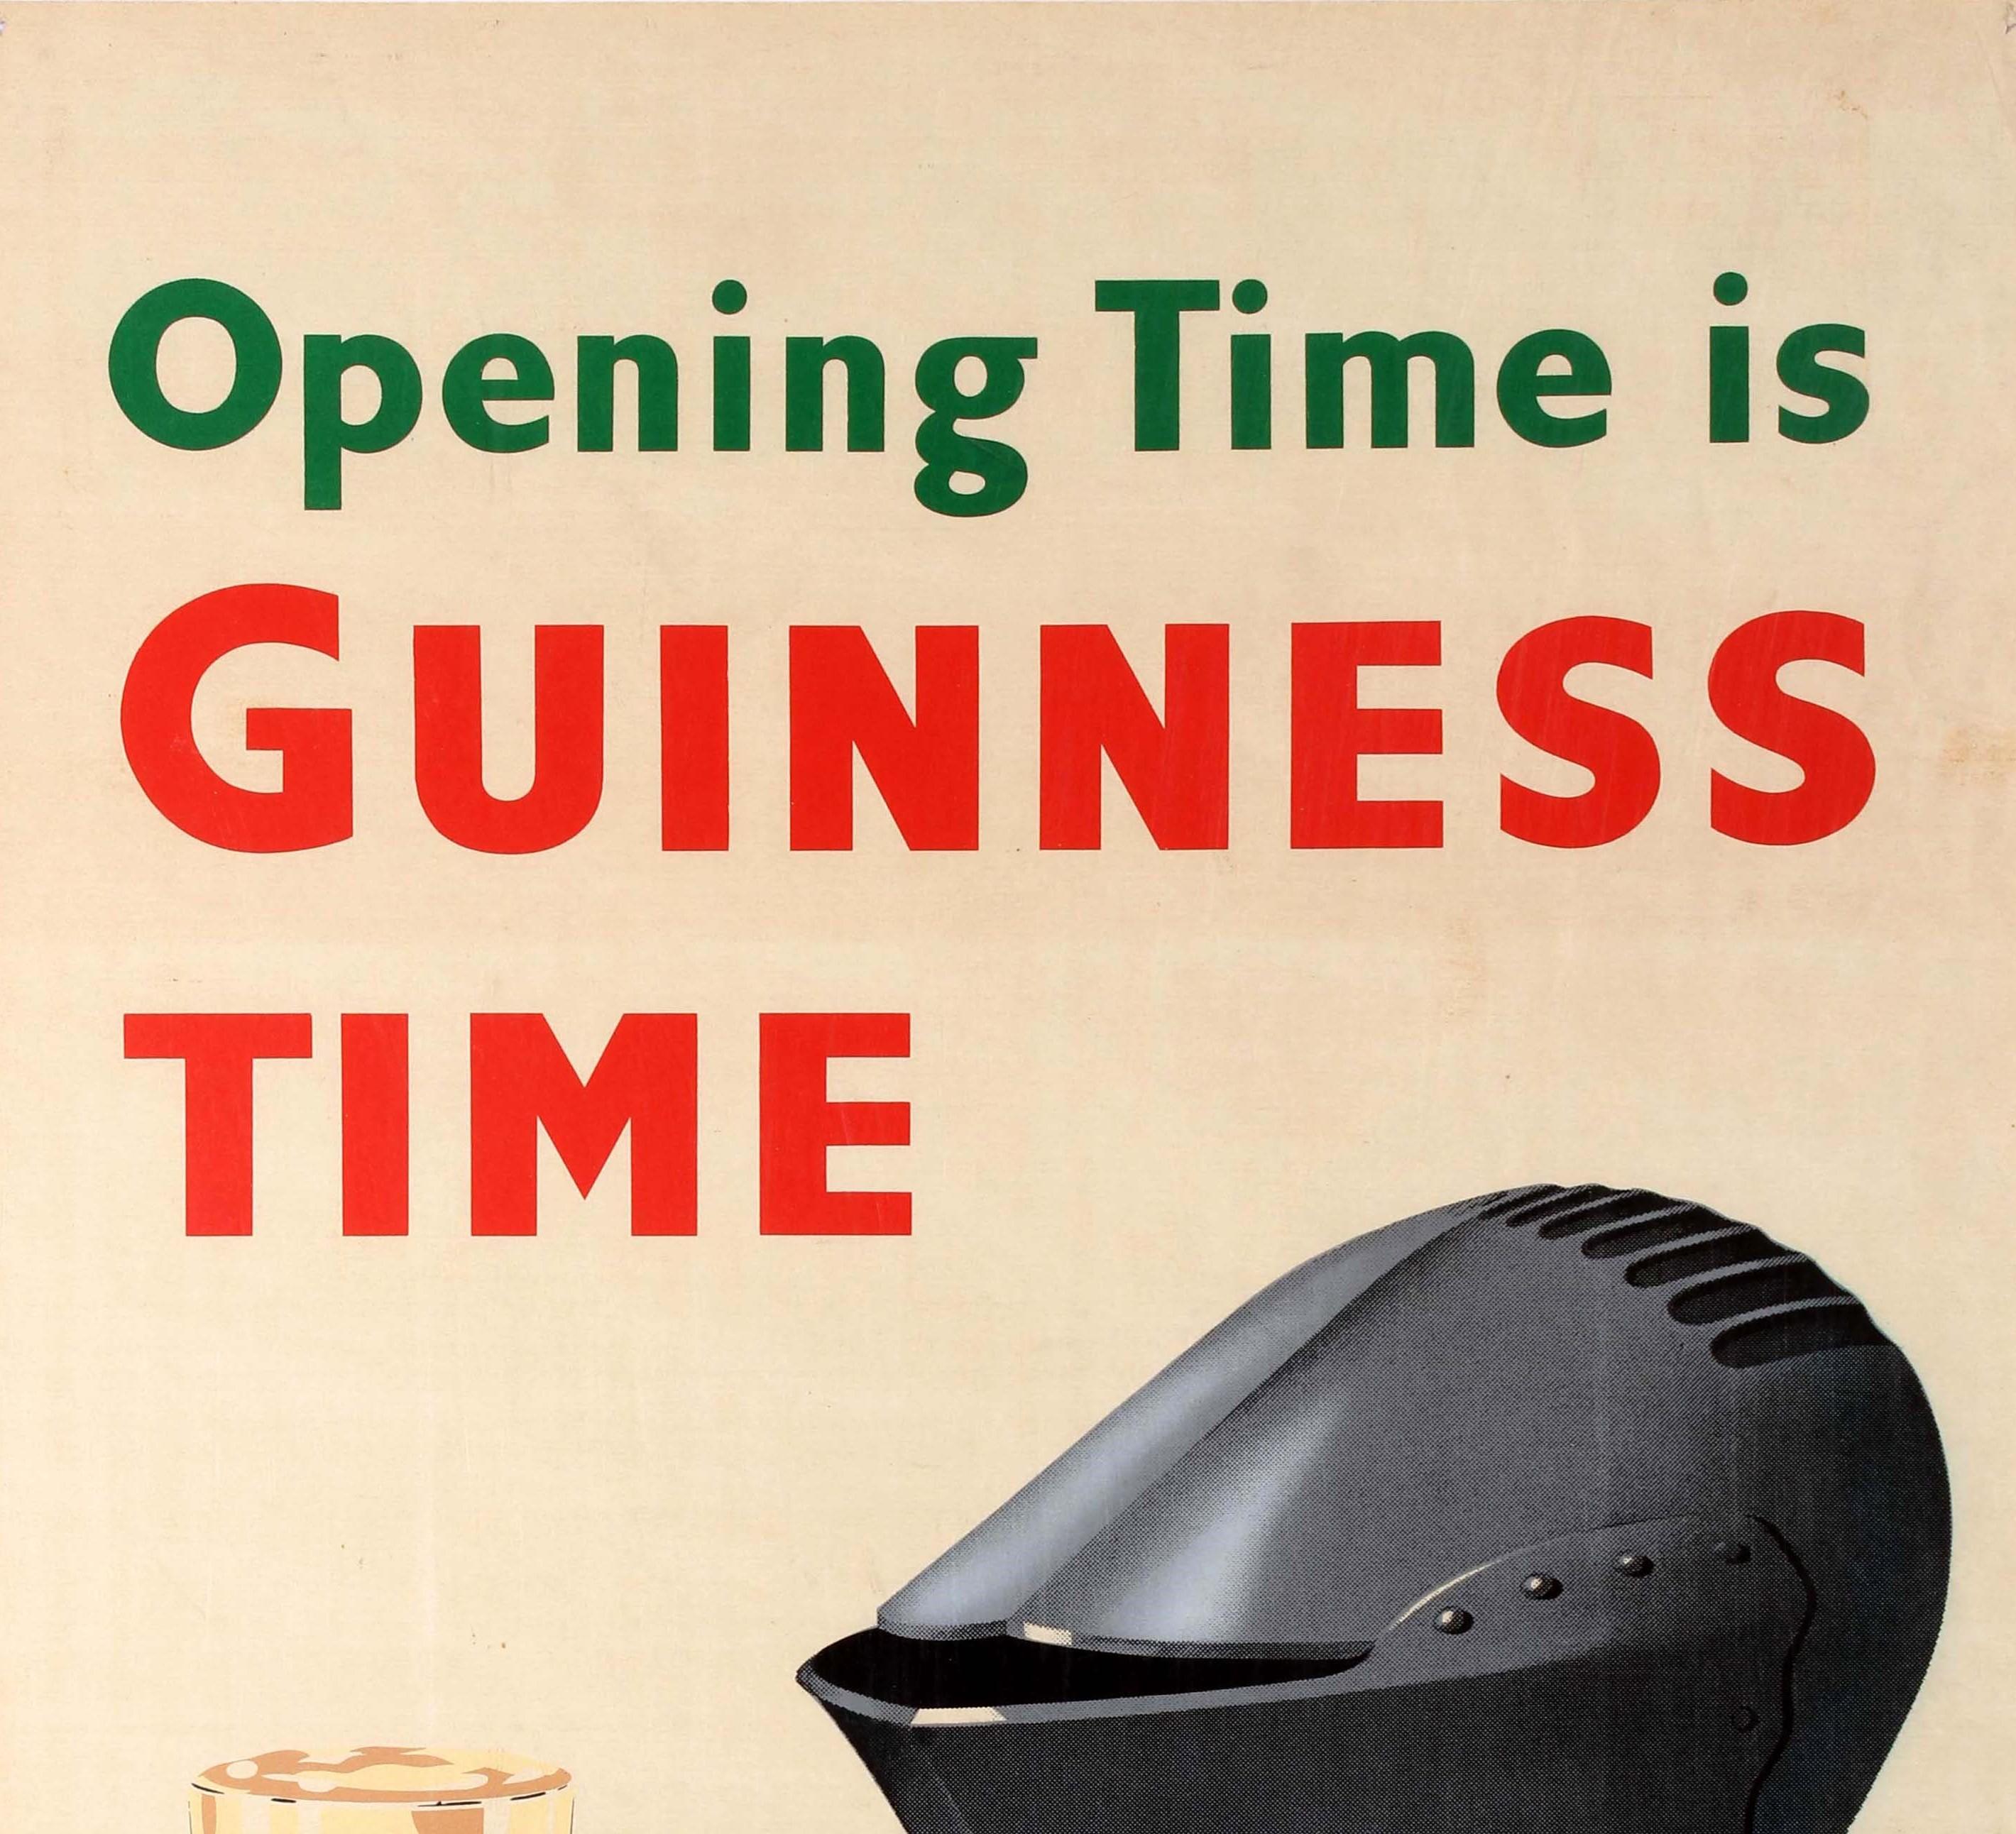 Original vintage Guinness advertising poster with the iconic slogan Opening Time Is Guinness Time above a great design featuring a knight in shining armour holding up a glass in his gauntlet gloved hand to the slit in his helmet to drink a pint of